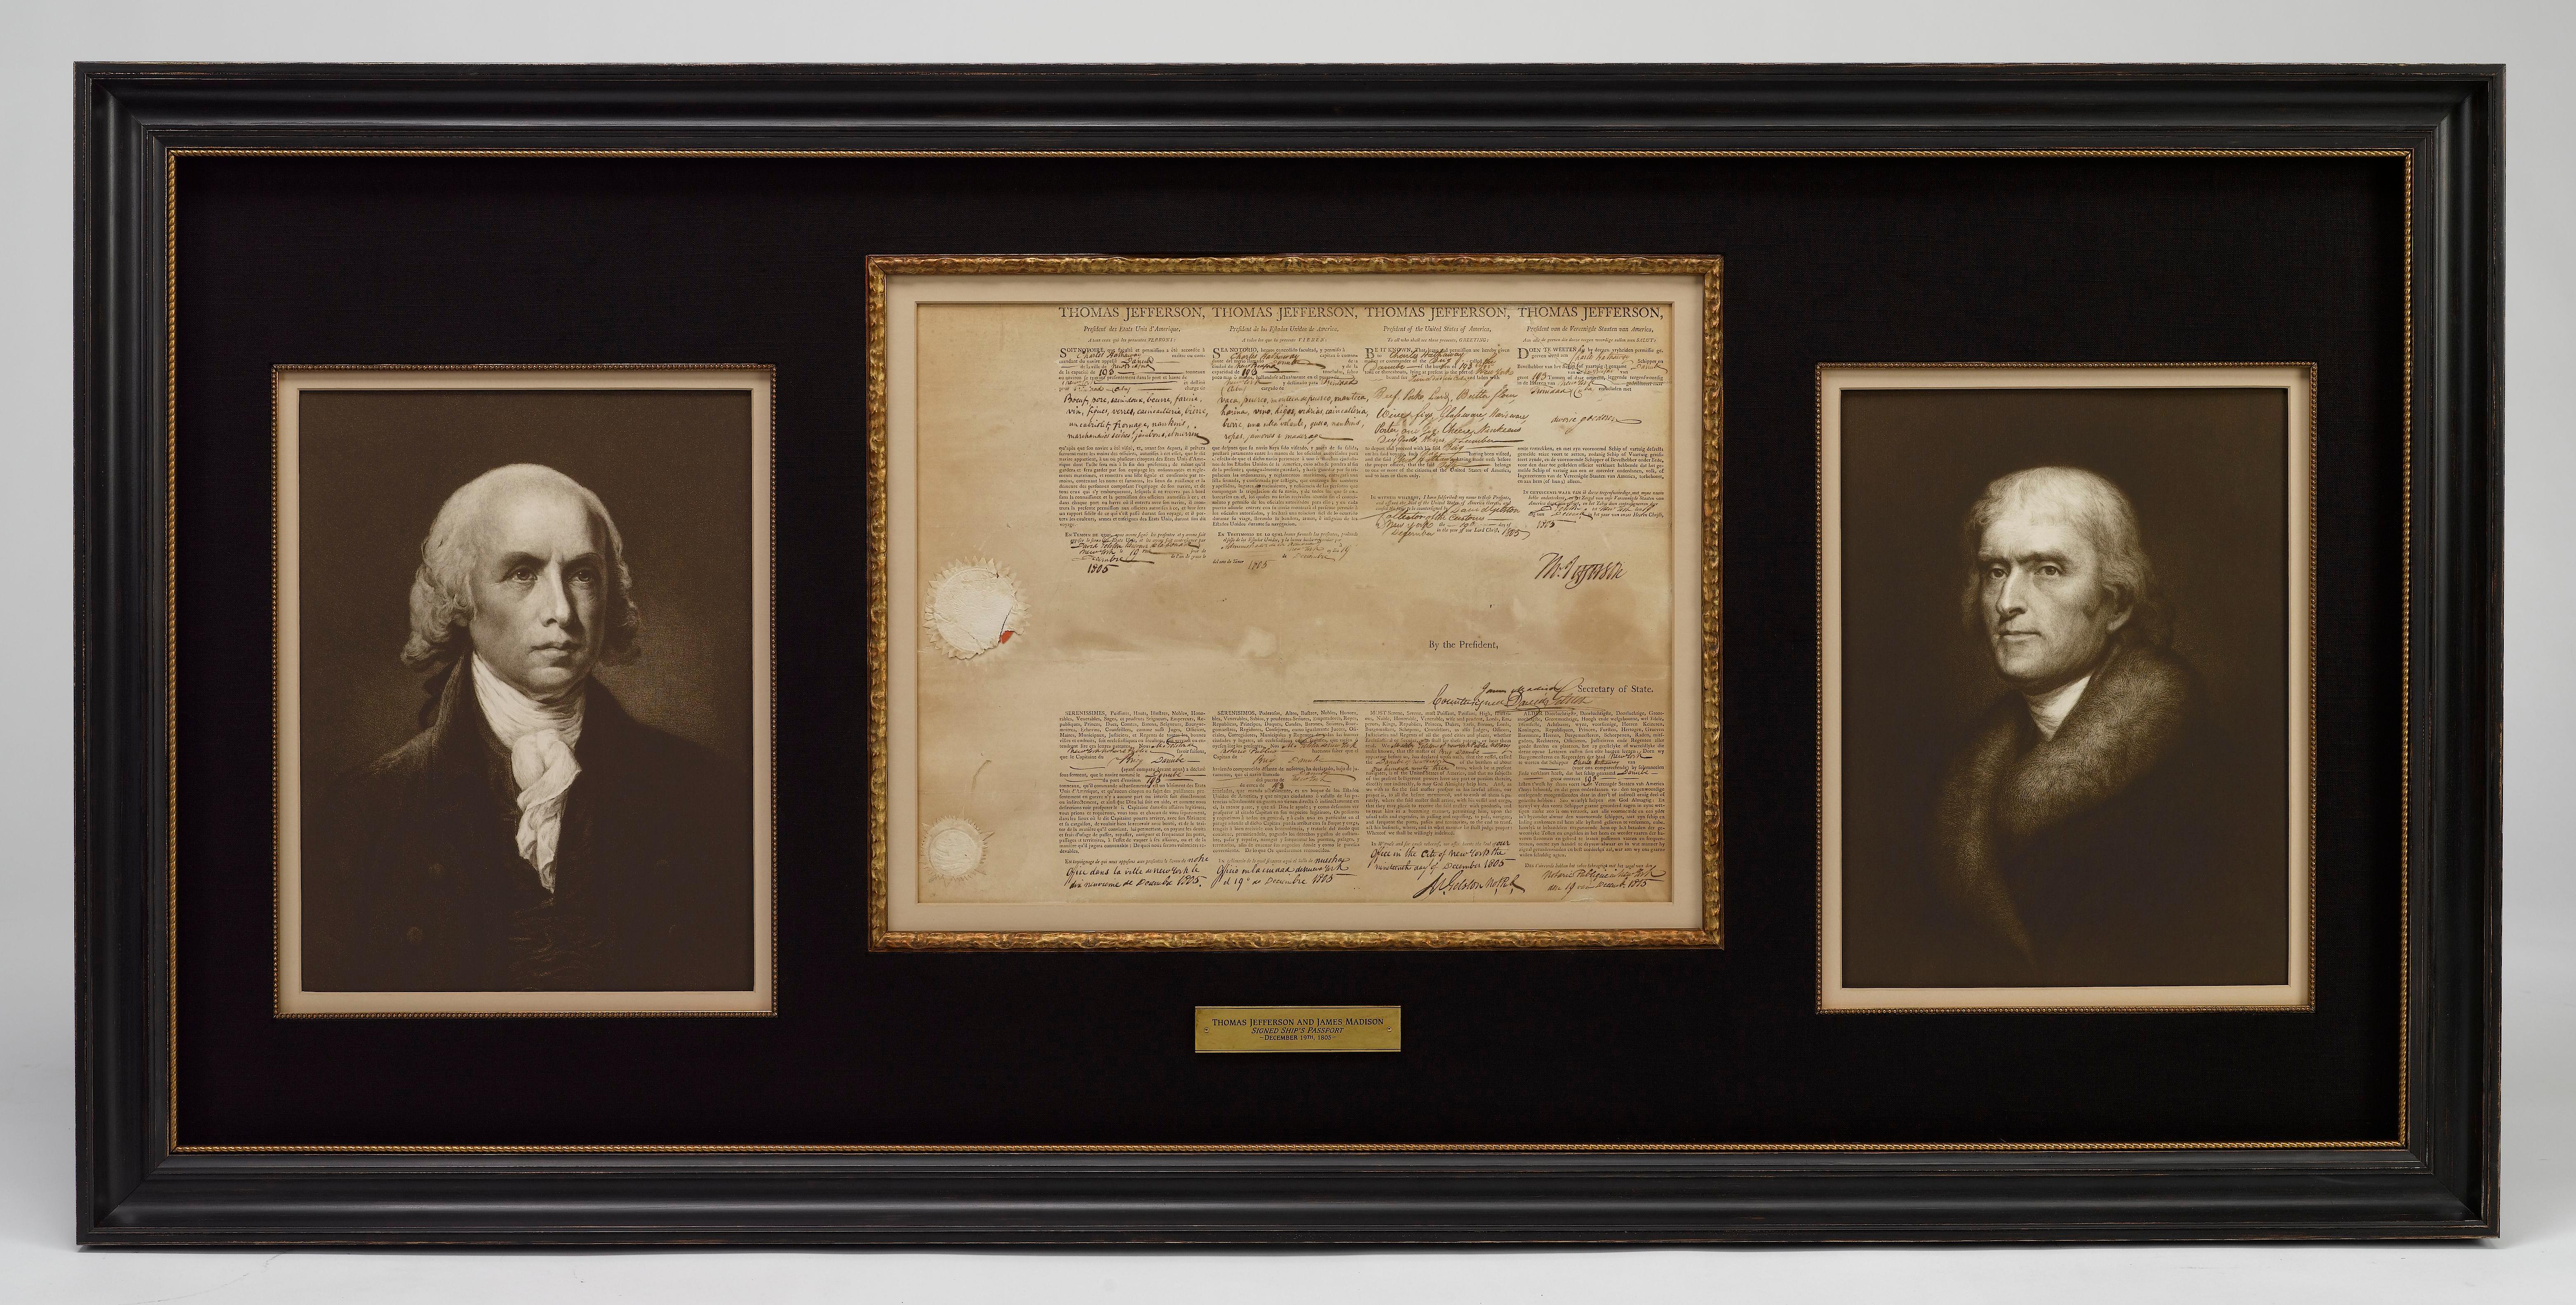 This rare official document, dated December 19, 1805, is signed by both Thomas Jefferson as the nation's third President and James Madison as Secretary of State. The document, partially printed in columns and finished by hand in ink, consists of